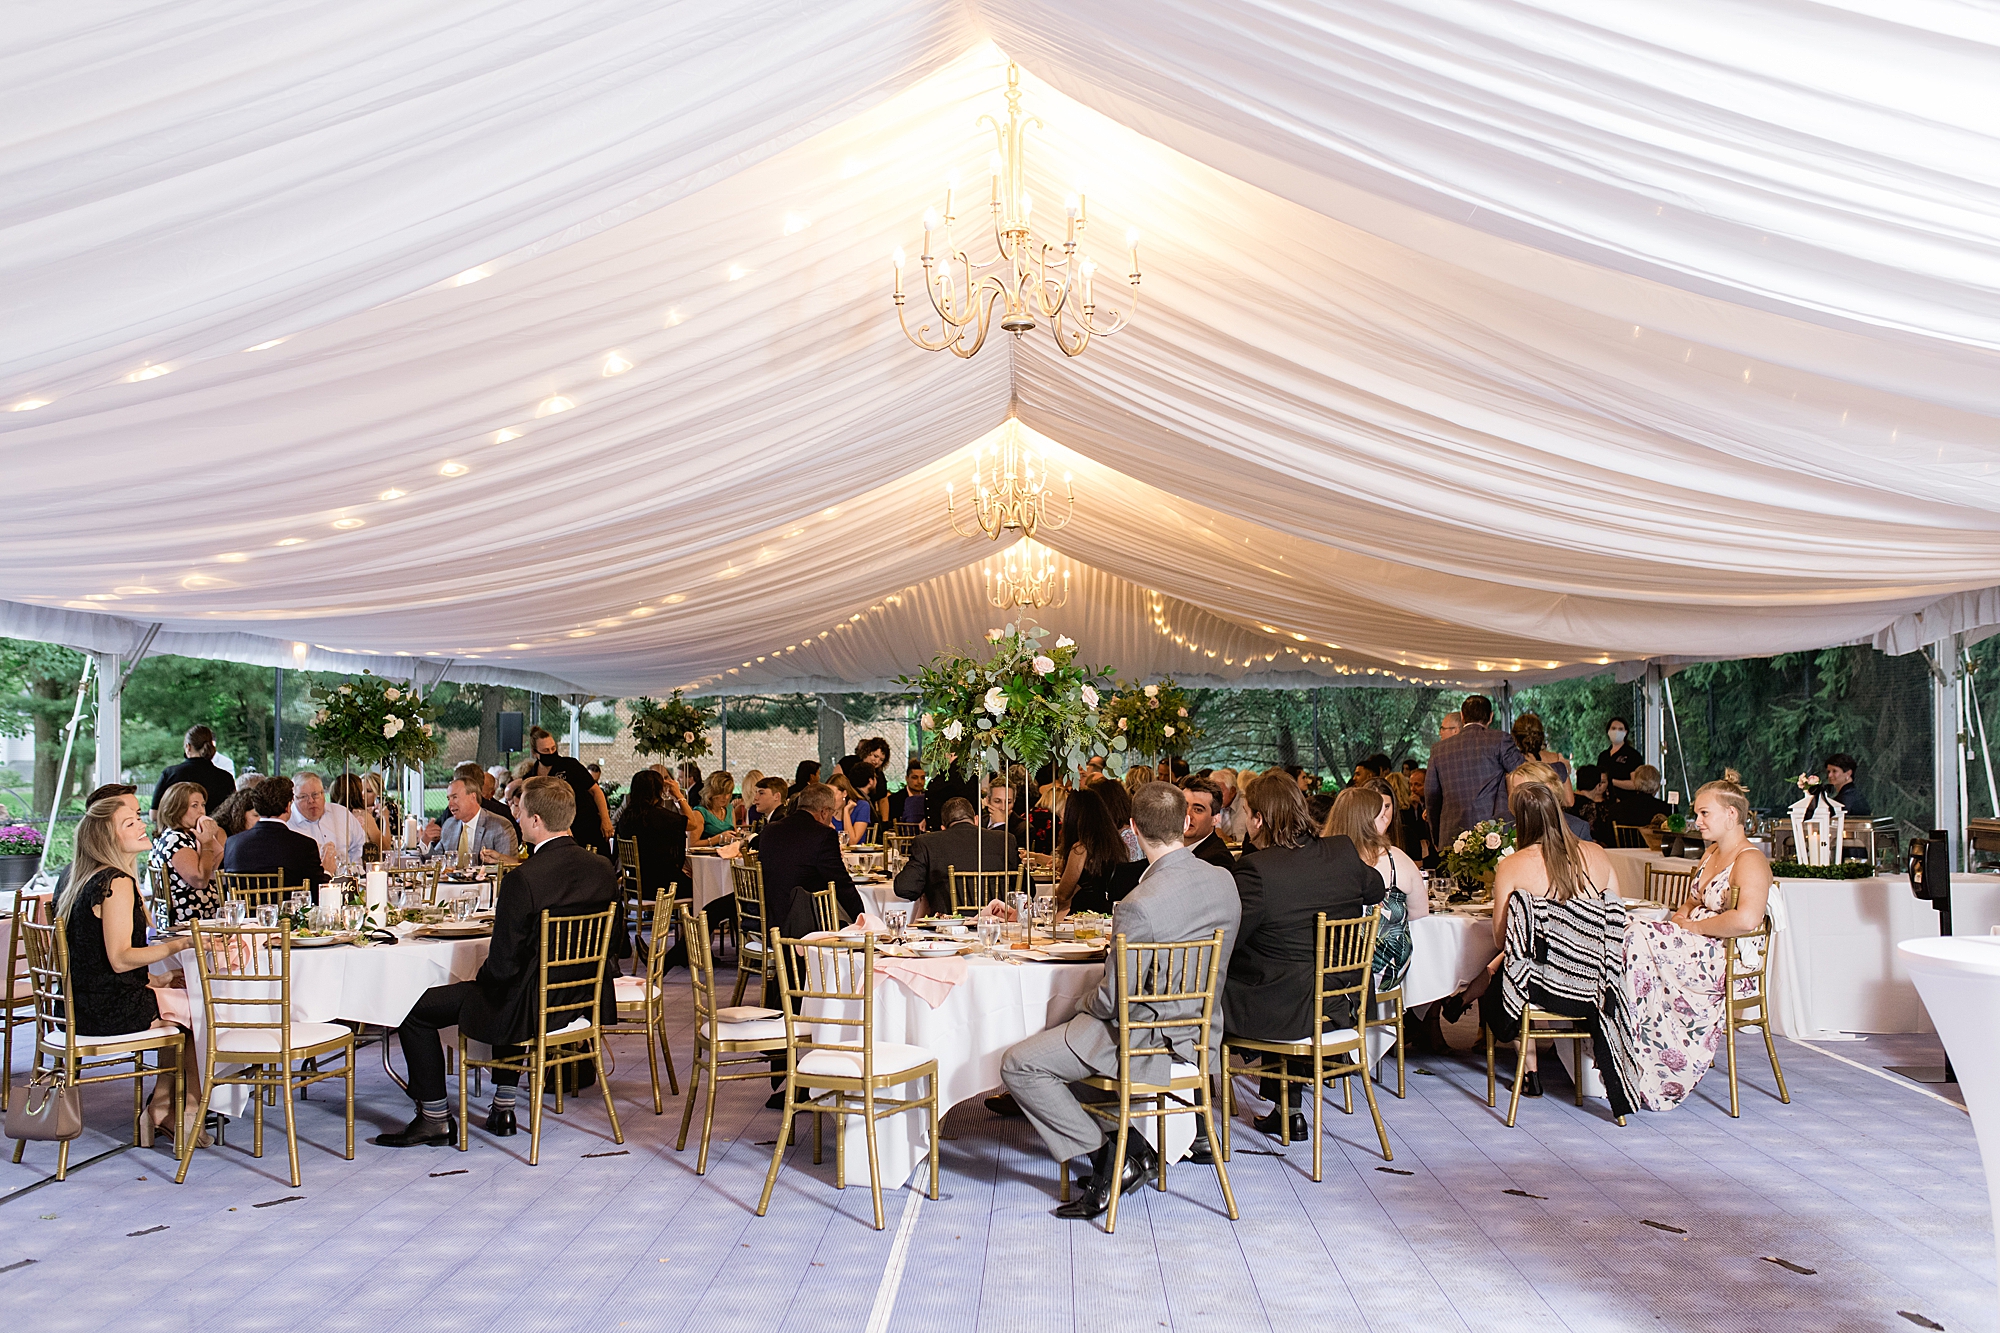 A classic late summer tented wedding at a family's private residence captured by Michigan wedding photographer Breanne Rochelle Photography.